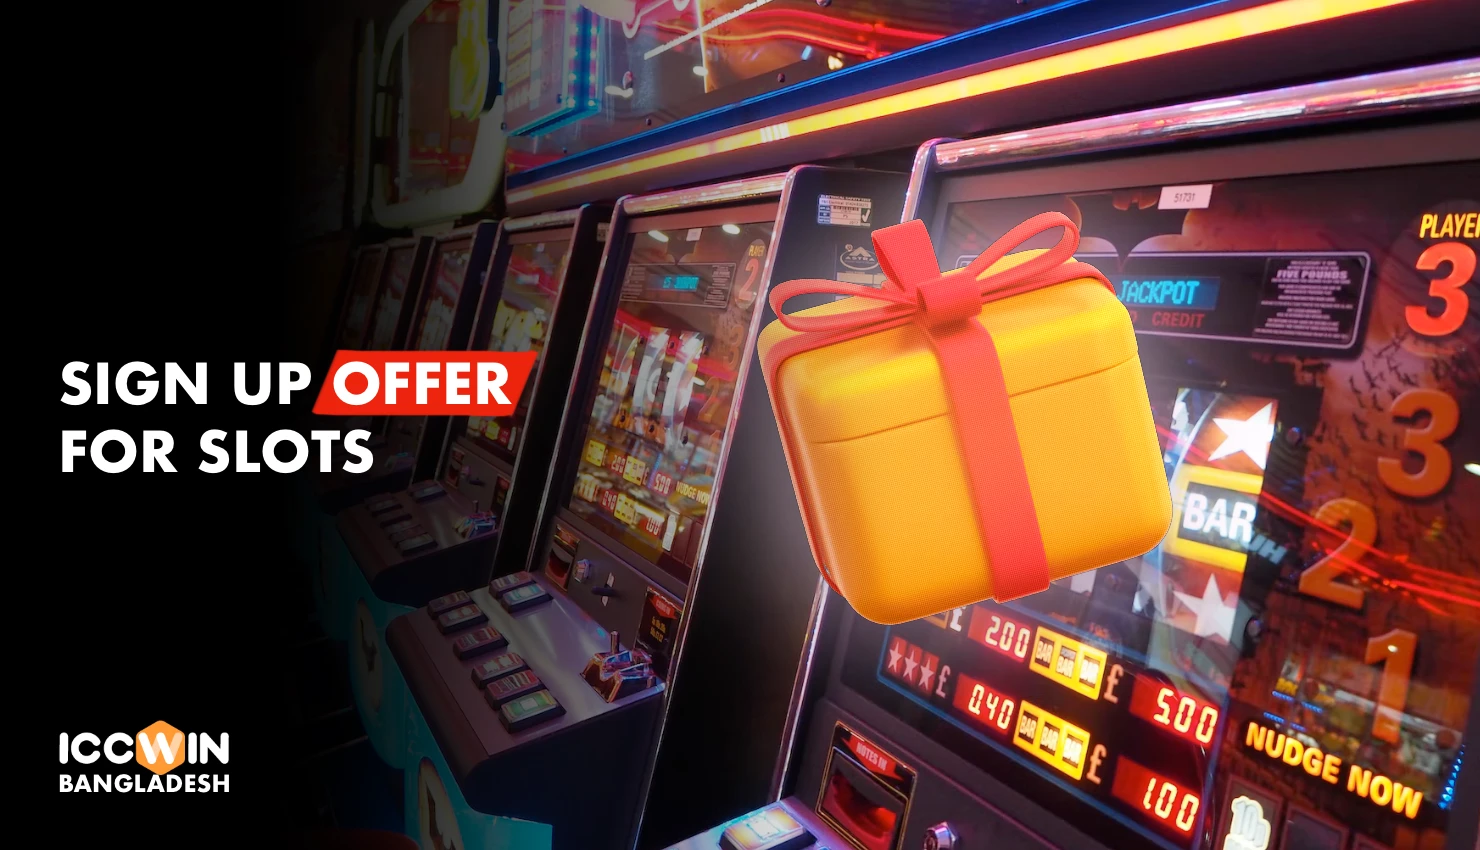 Welcome bonus for slots at Iccwin allows you to double the amount of your first deposit